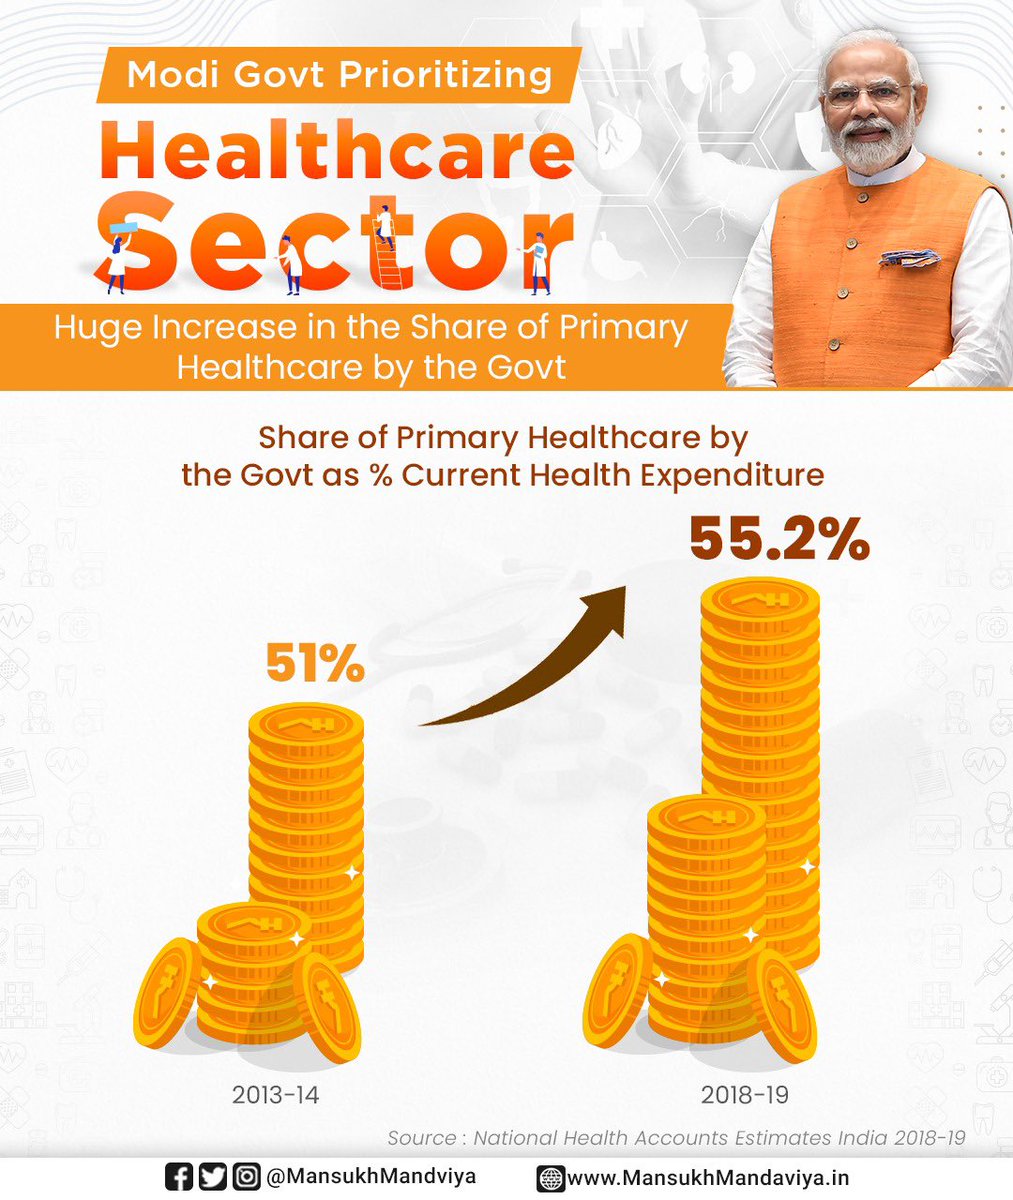 PM @NarendraModi Ji's Govt is enhancing access to comprehensive primary healthcare as a key strategy to achieve Universal Health Coverage in India. Govt spending on primary healthcare has increased from 51% in 2013-14 to 55% in 2018-19.